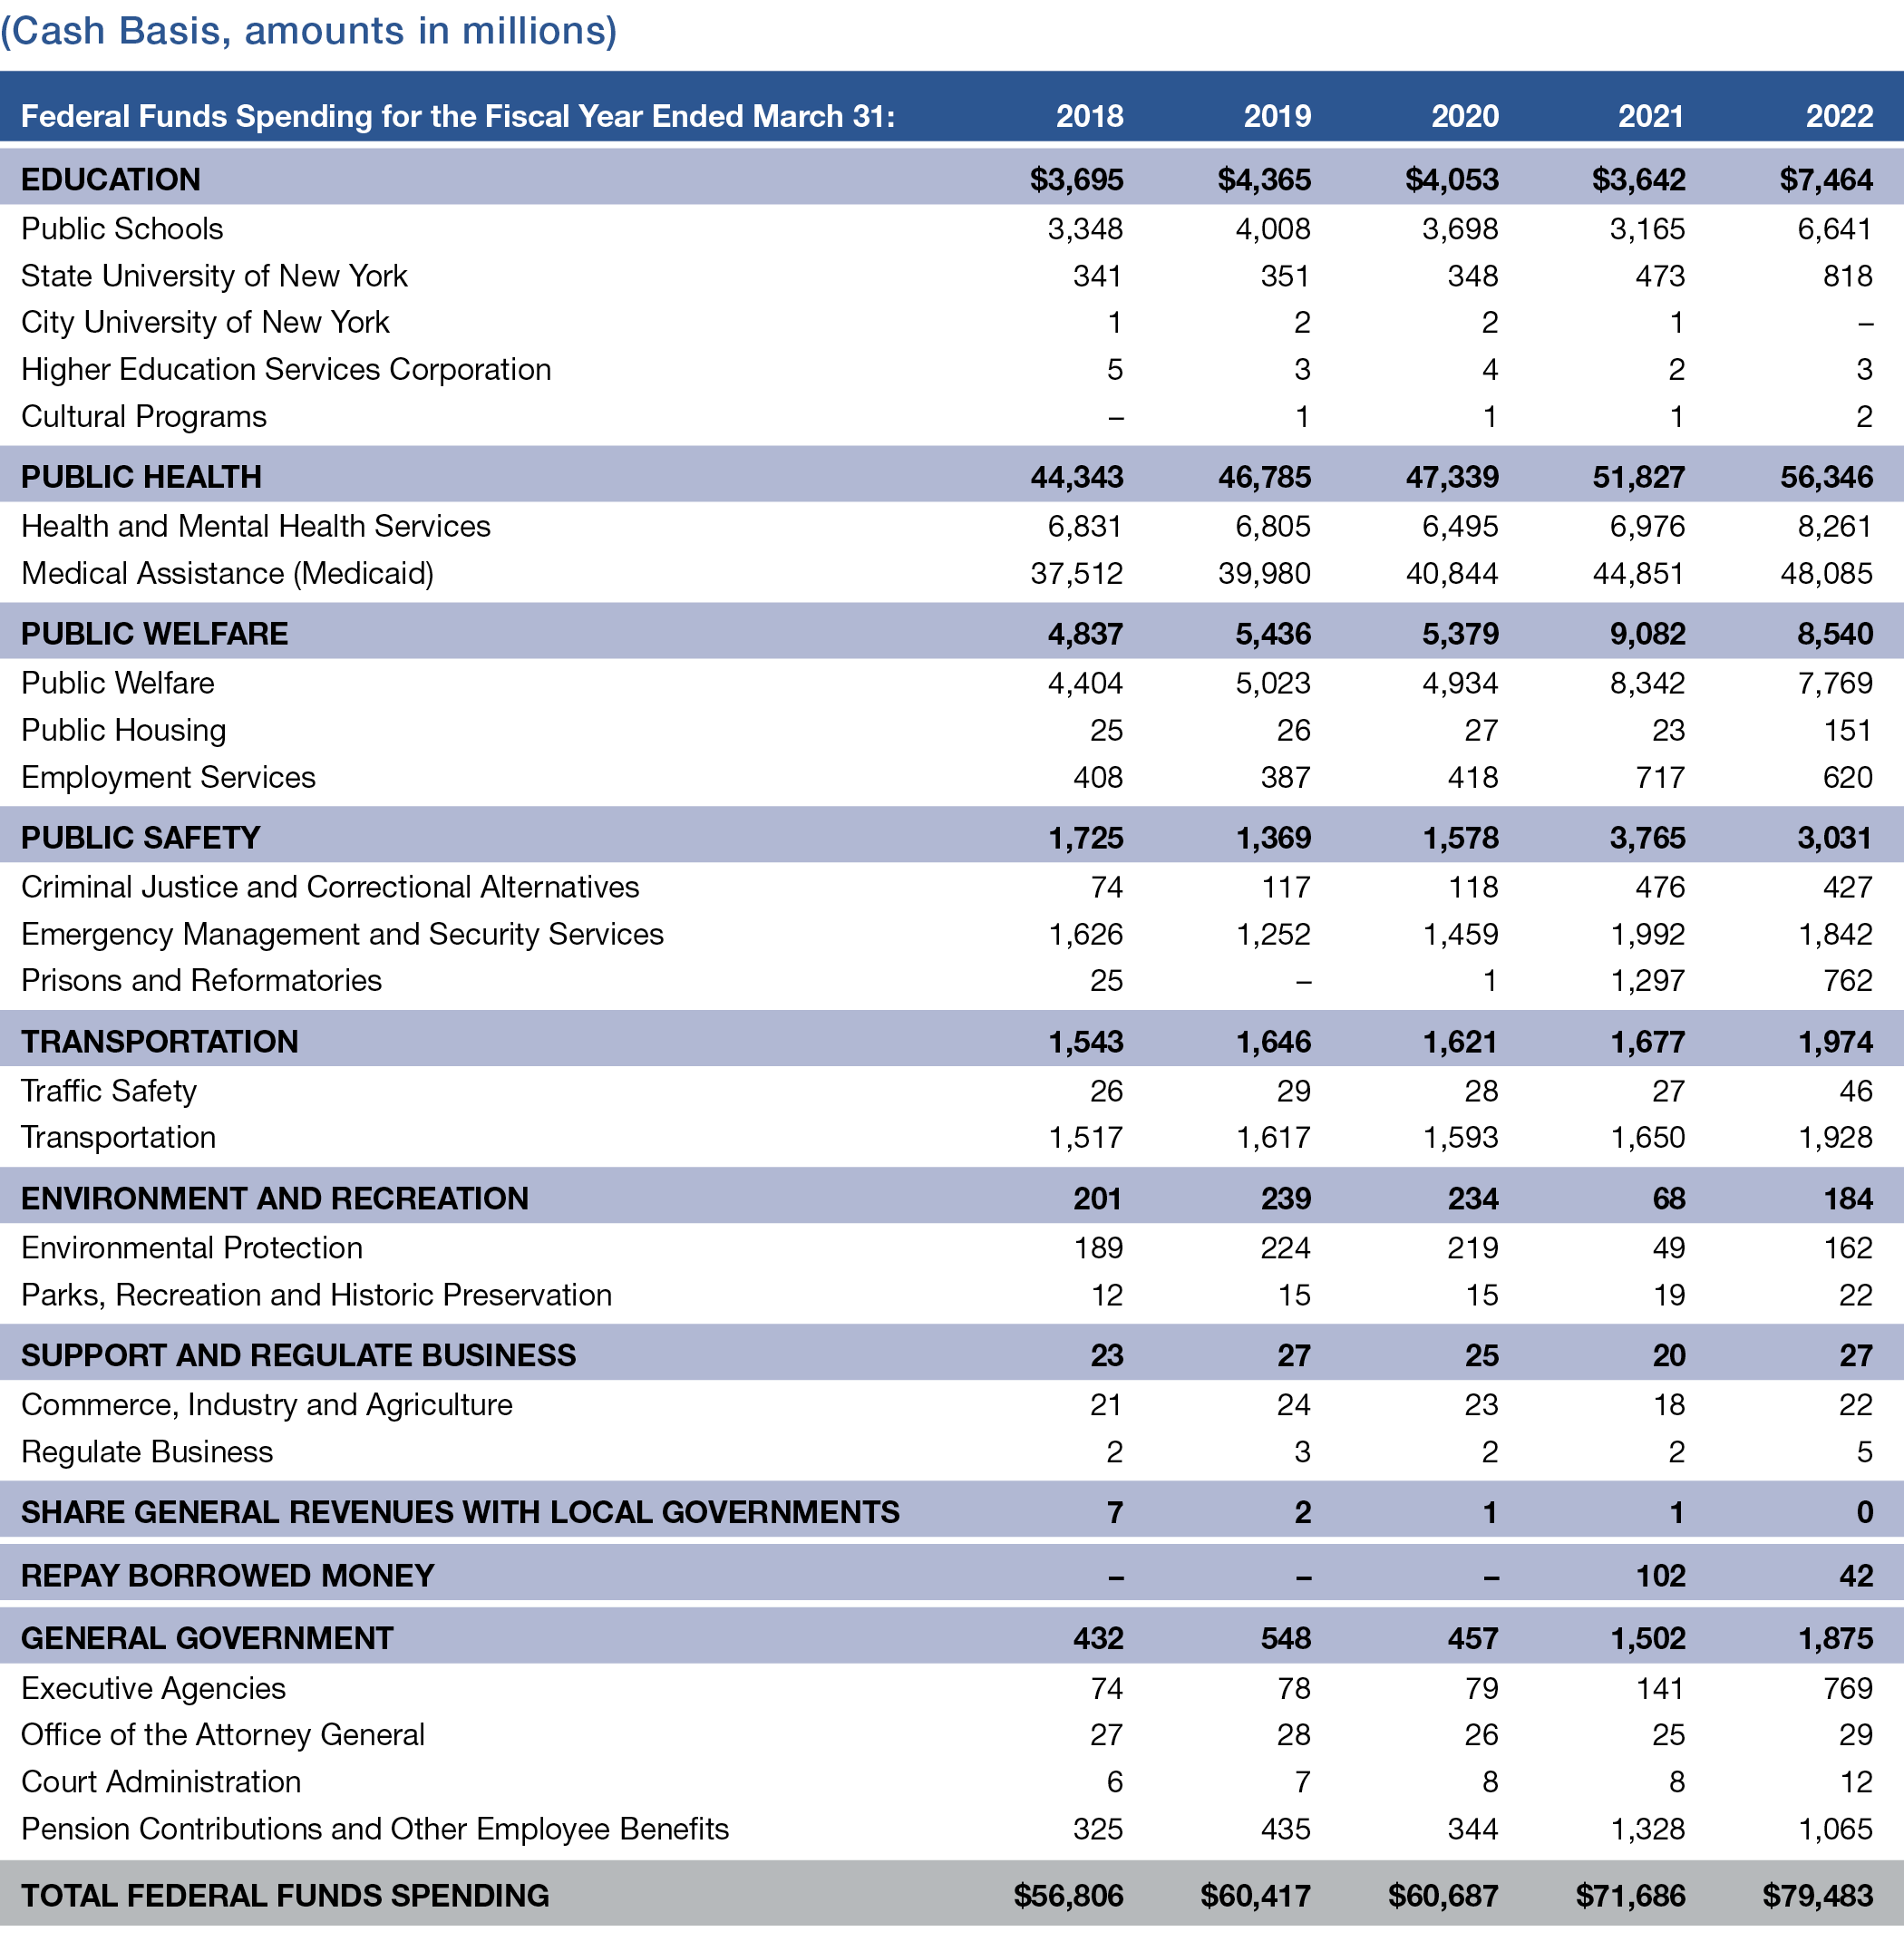 Table of Appendix 2: Federal Funds for the Fiscal Year Ended March 31